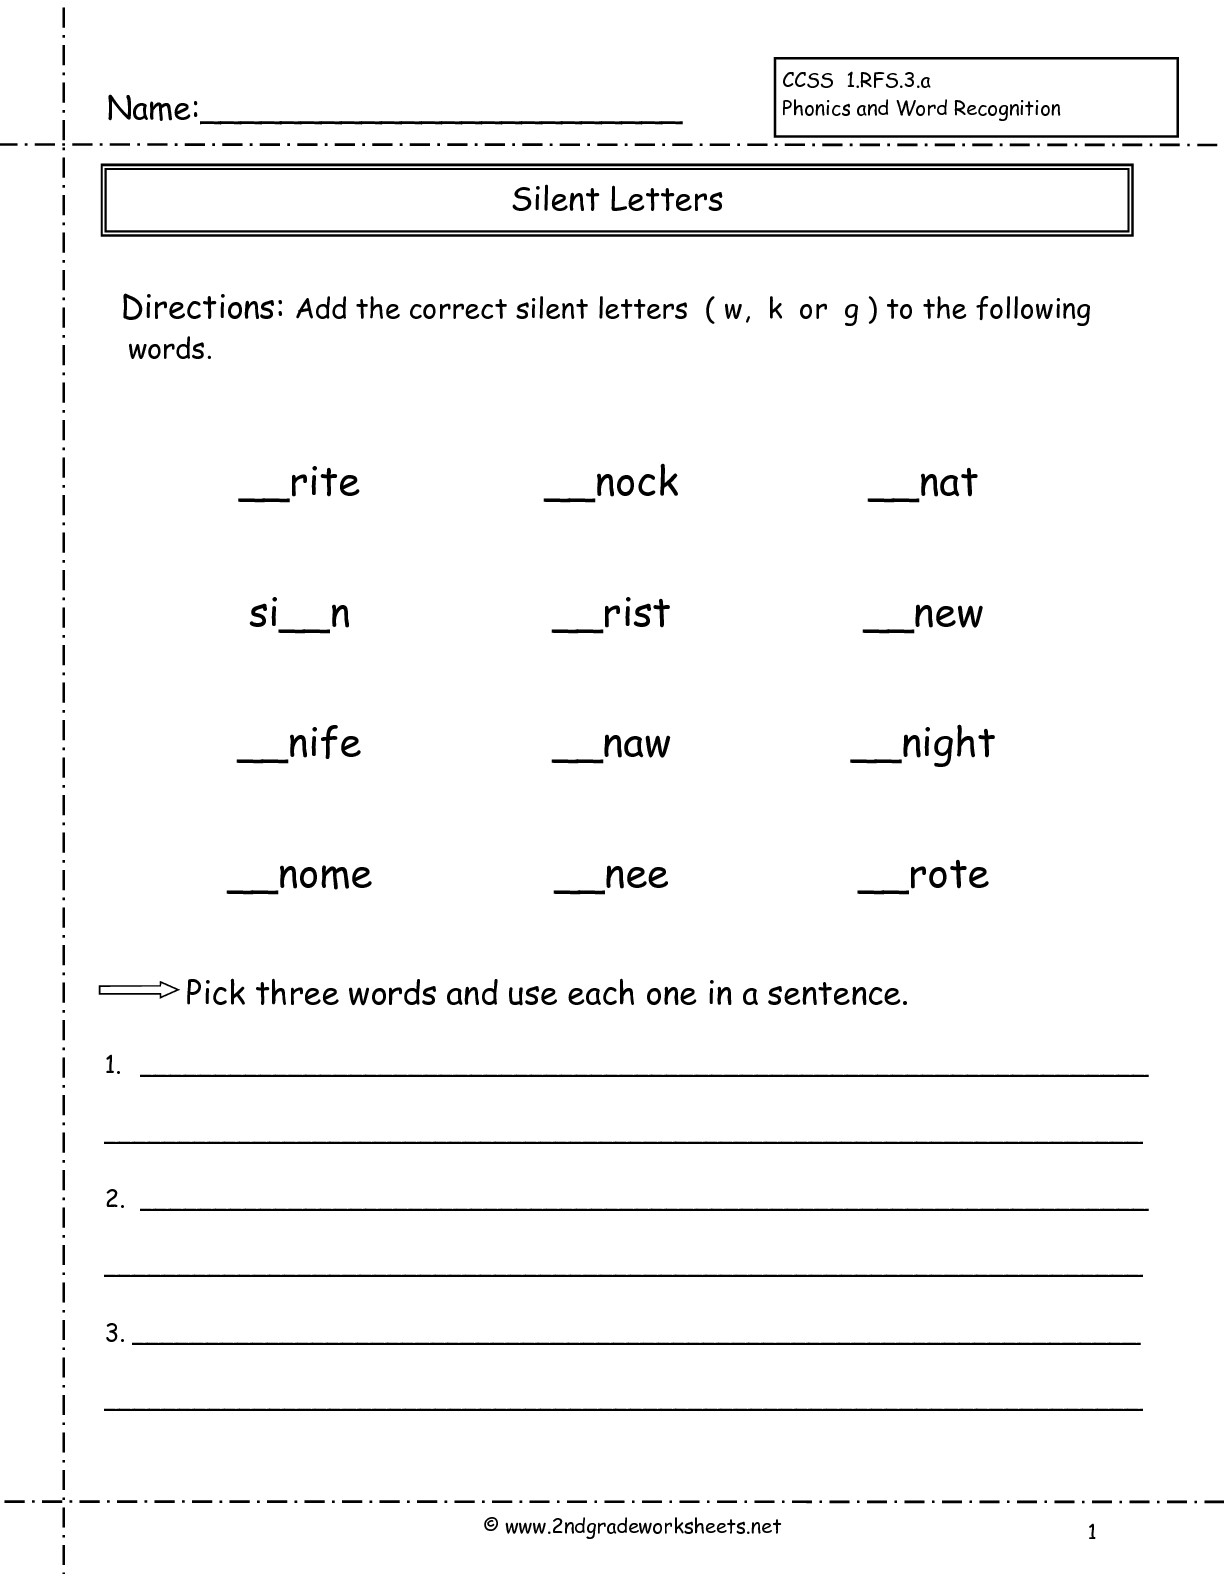 Second Grade Phonics Worksheets And Flashcards - Free Printable Phonics Assessments